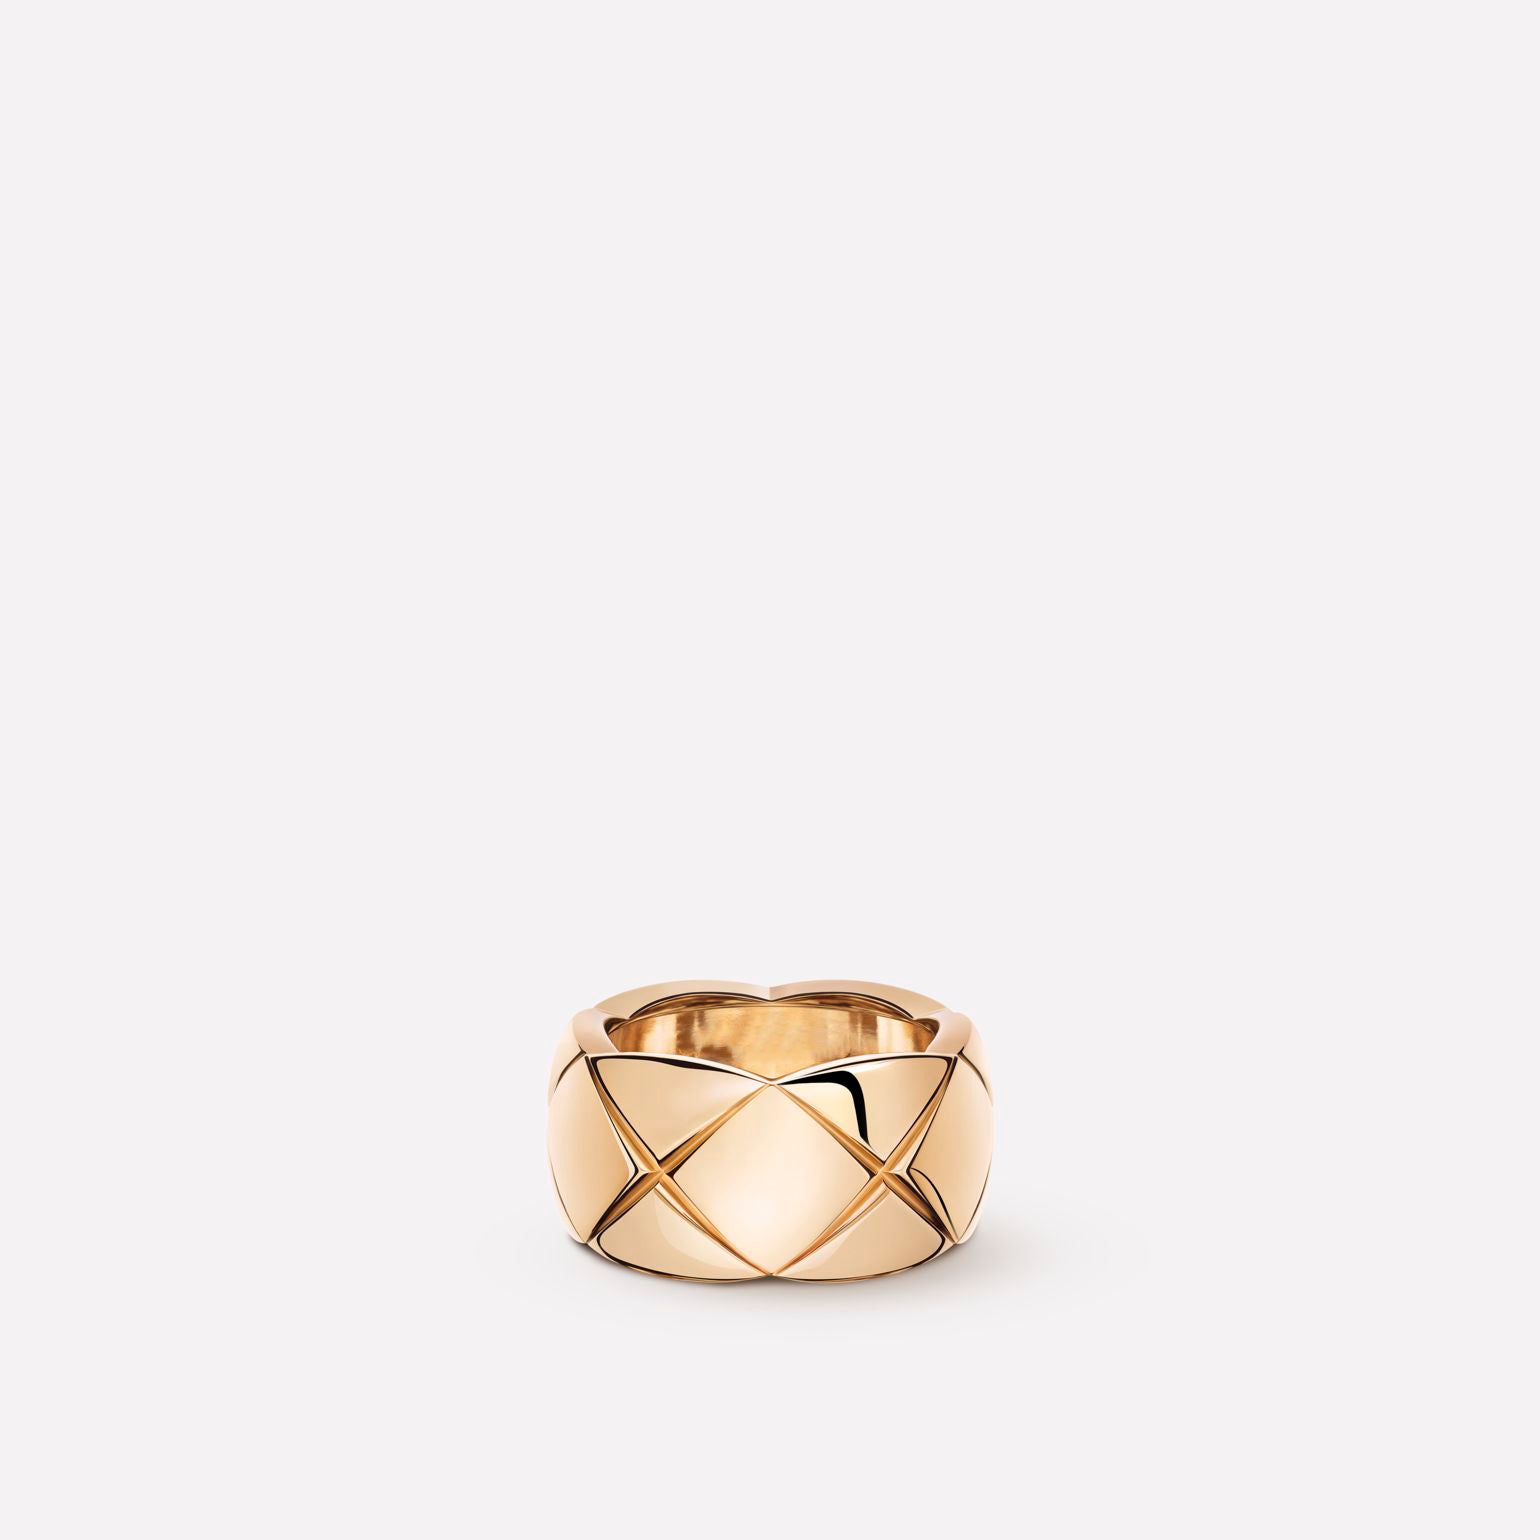 Coco Quilted Motif Ring, Large Version, BEIGE Gold